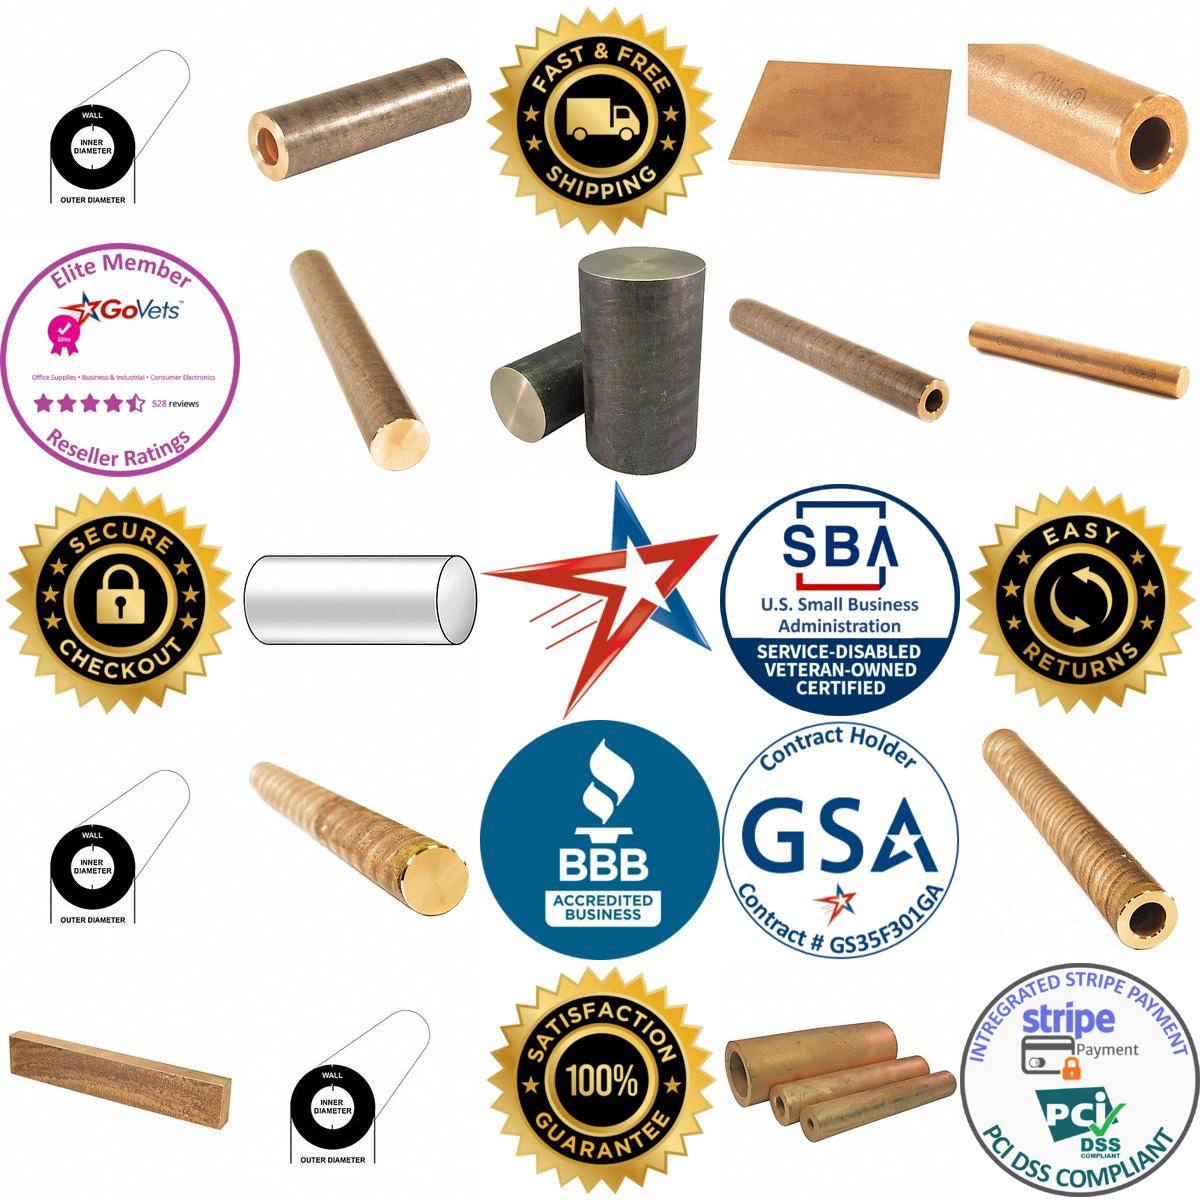 A selection of Bronze products on GoVets